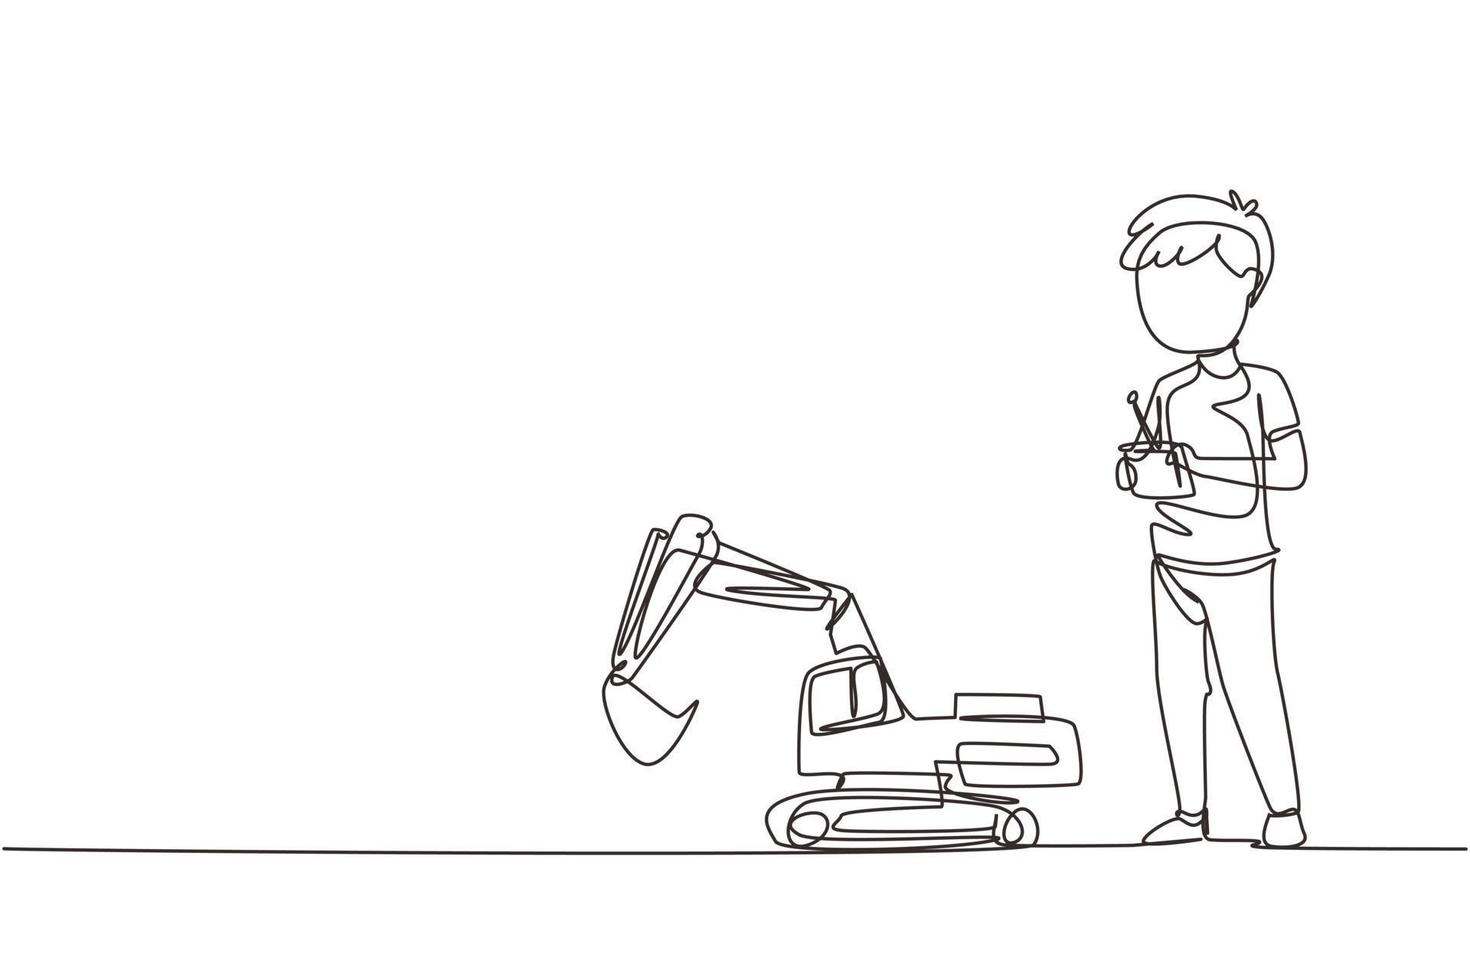 Single continuous line drawing boy playing with remote-controlled excavator toy. Kids playing with electronic toy excavator with remote control in hands. One line graphic design vector illustration